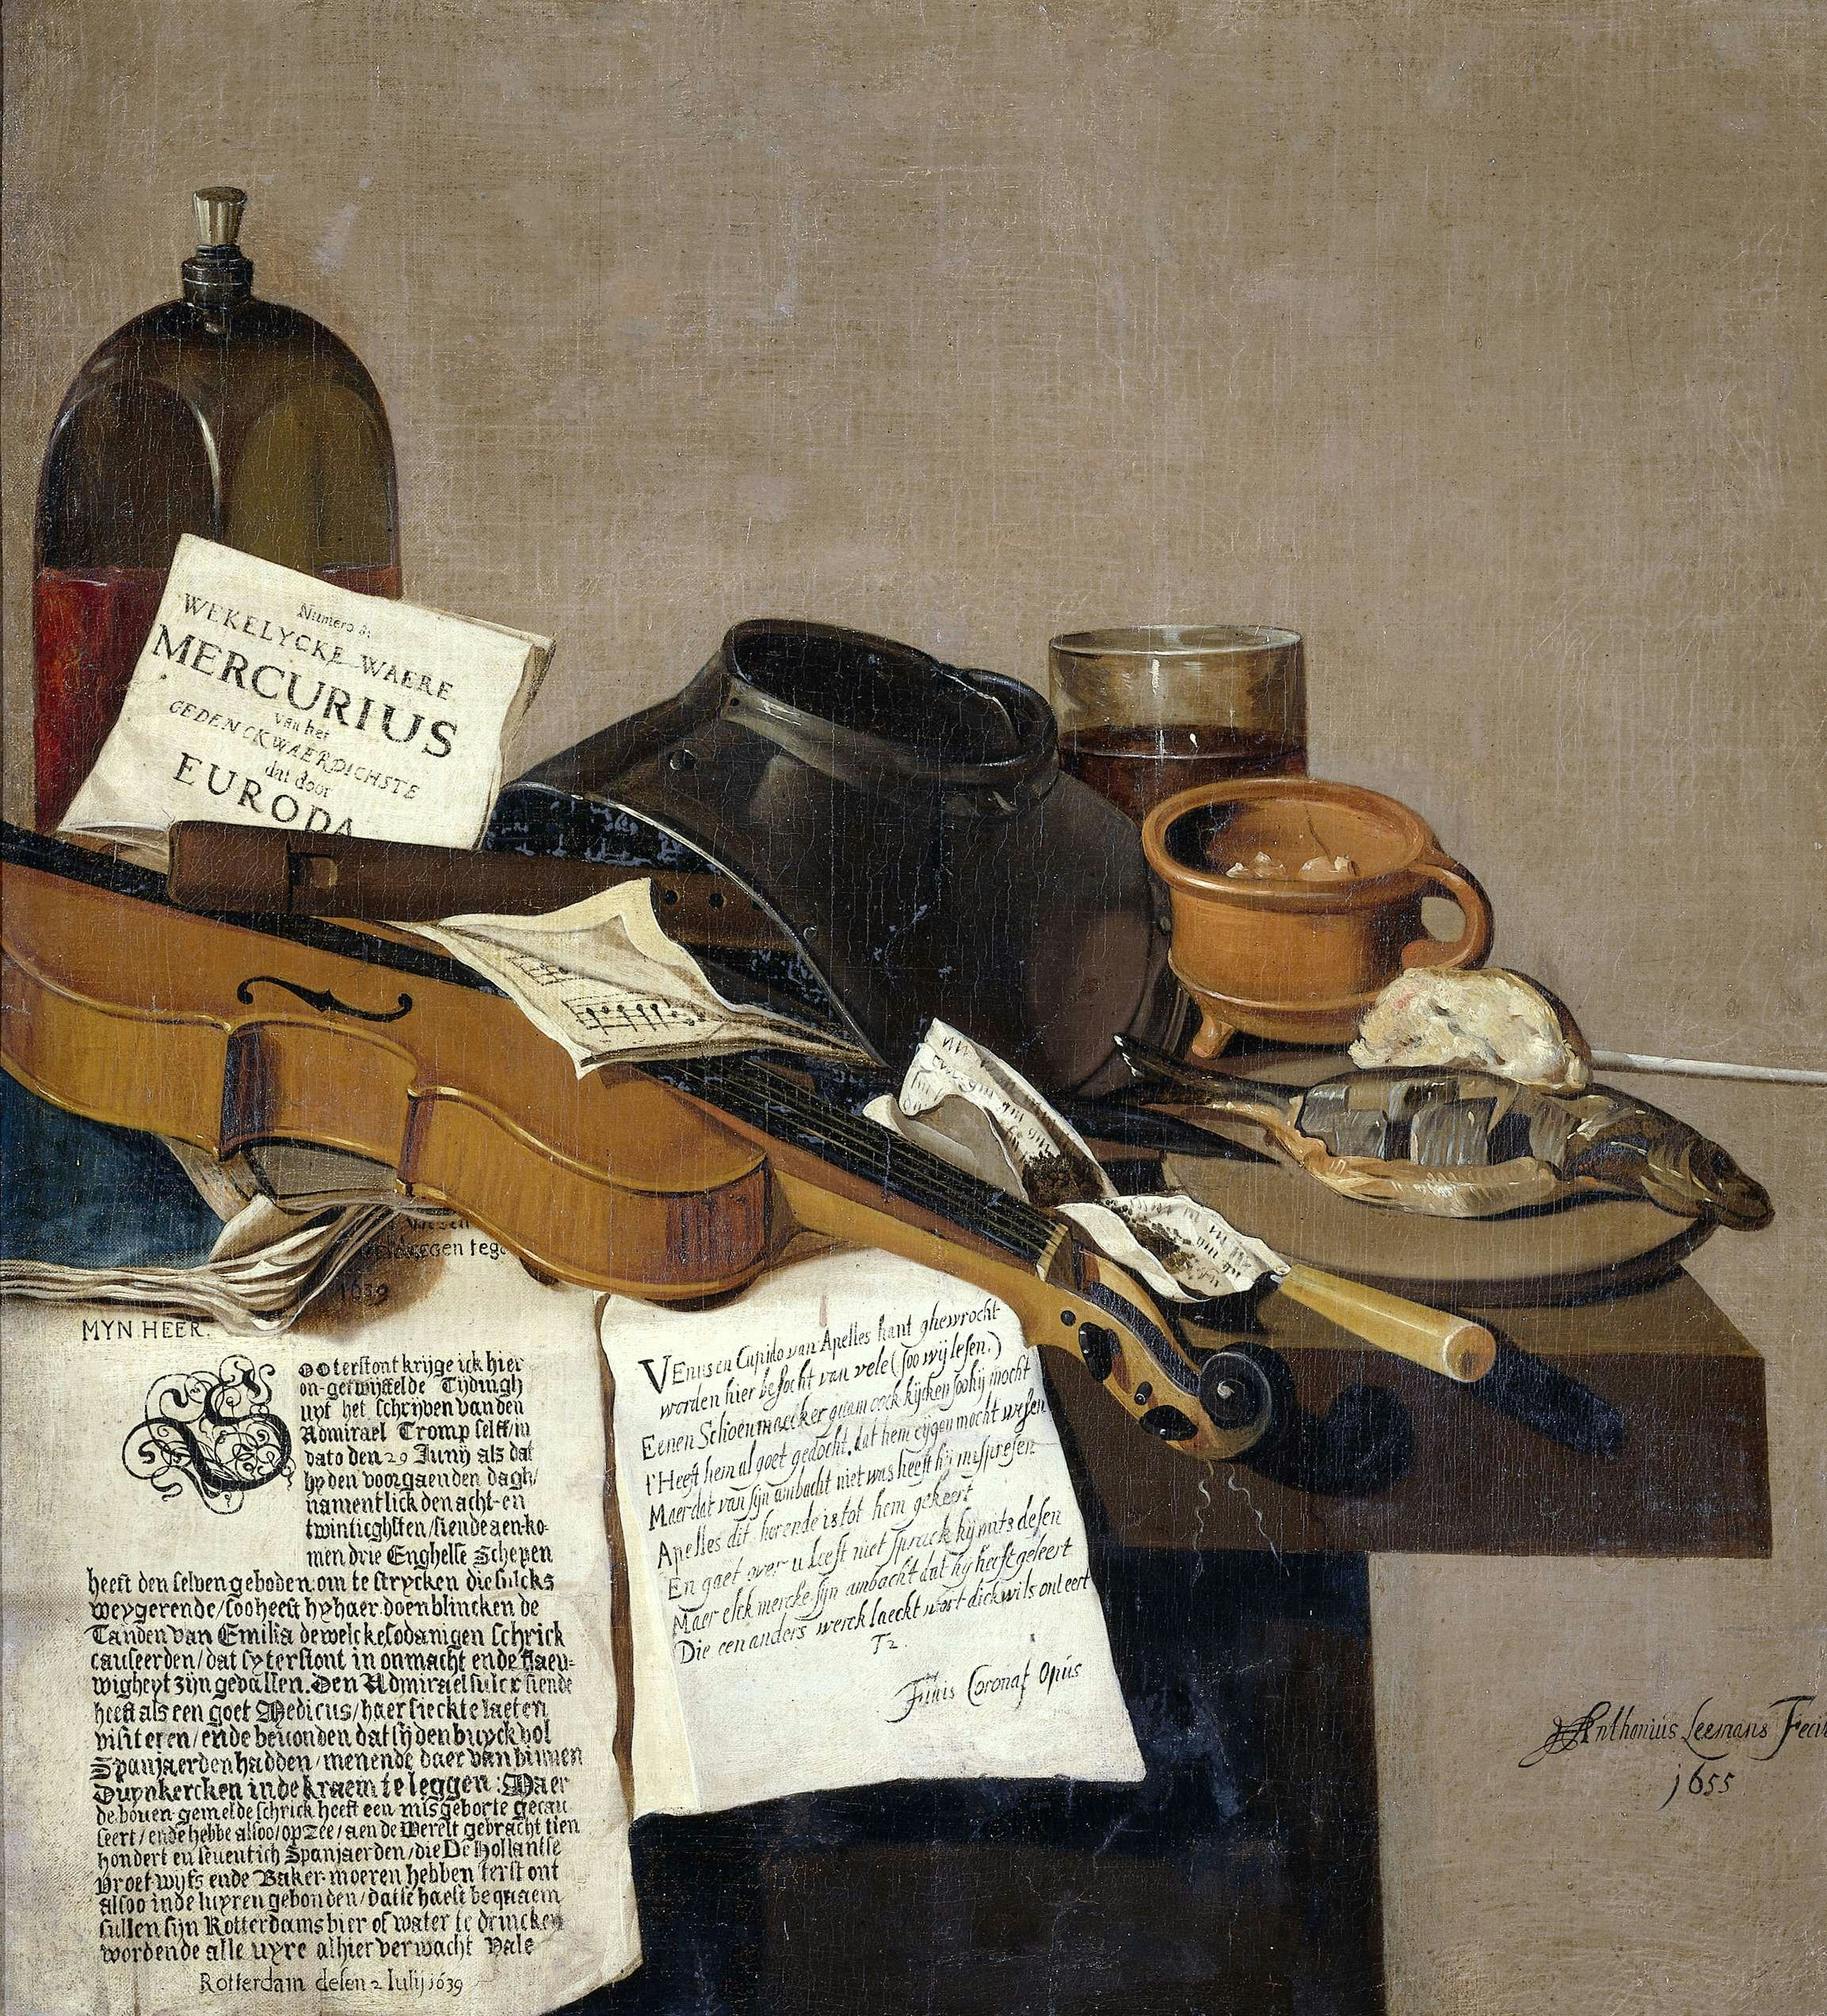 Title: Still Life with a Copy of De Waere Mercurius, a Broadsheet with the News of Tromp's Victory over three English Ships on 28 June 1639, and a Poem telling the story of Apelles and the Cobbler. Institution:Rijksmuseum. Provider: Rijksmuseum. Providing Country: Netherlands. Public Domain